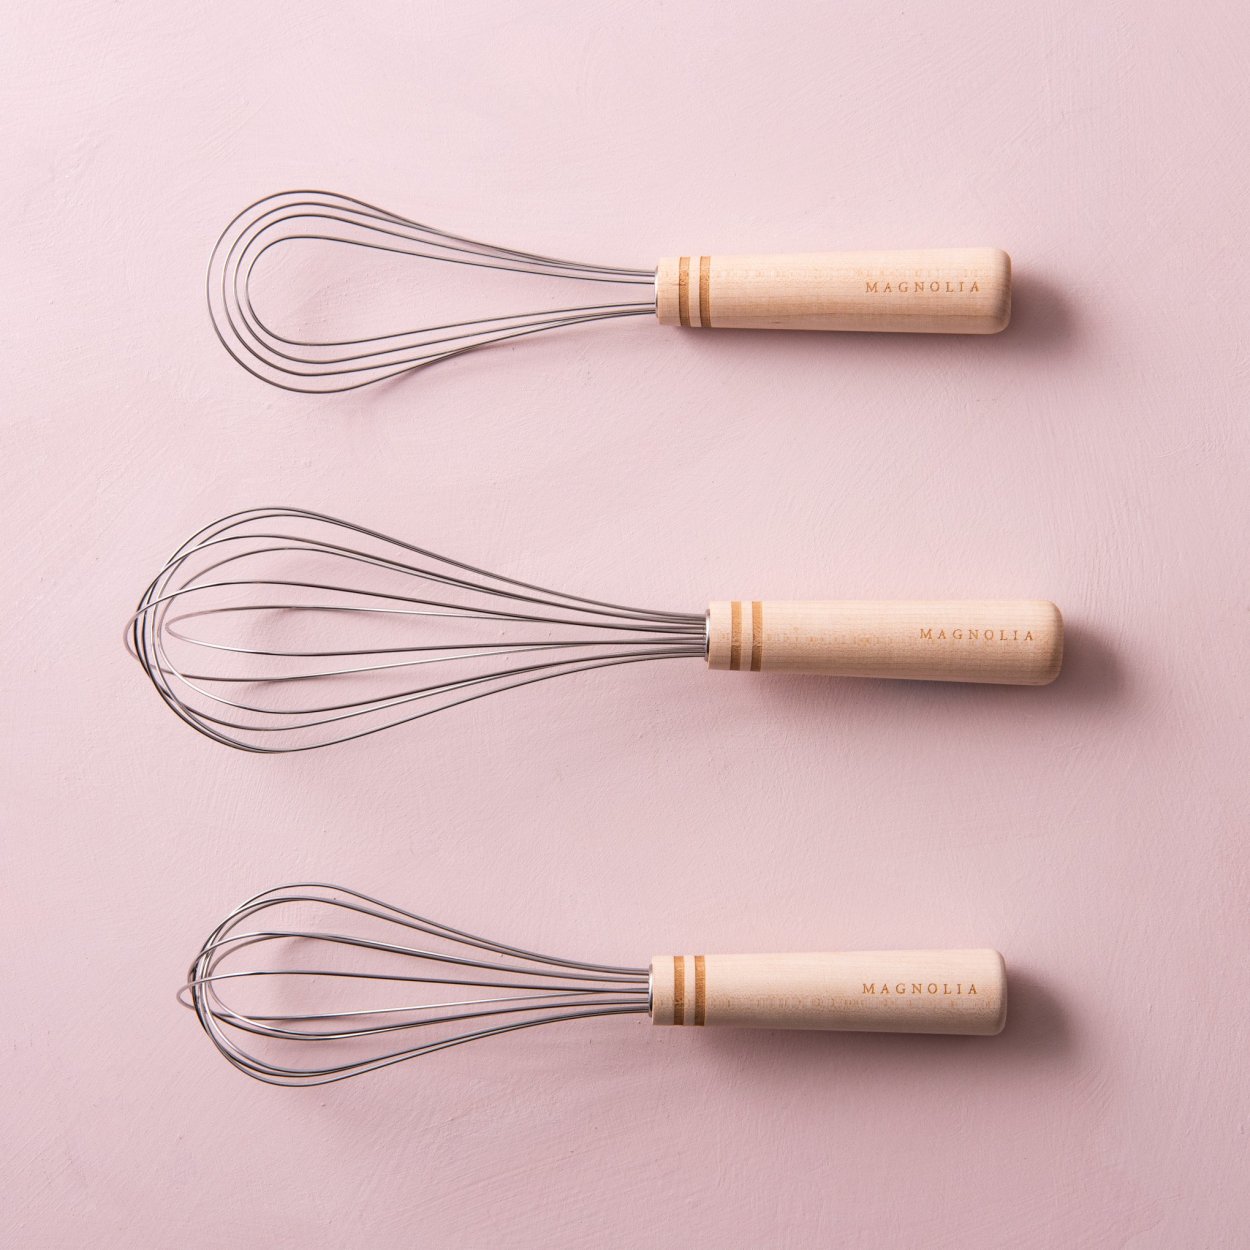 Flat Roux Whip 14 Long - Stainless Steel | Bakedeco